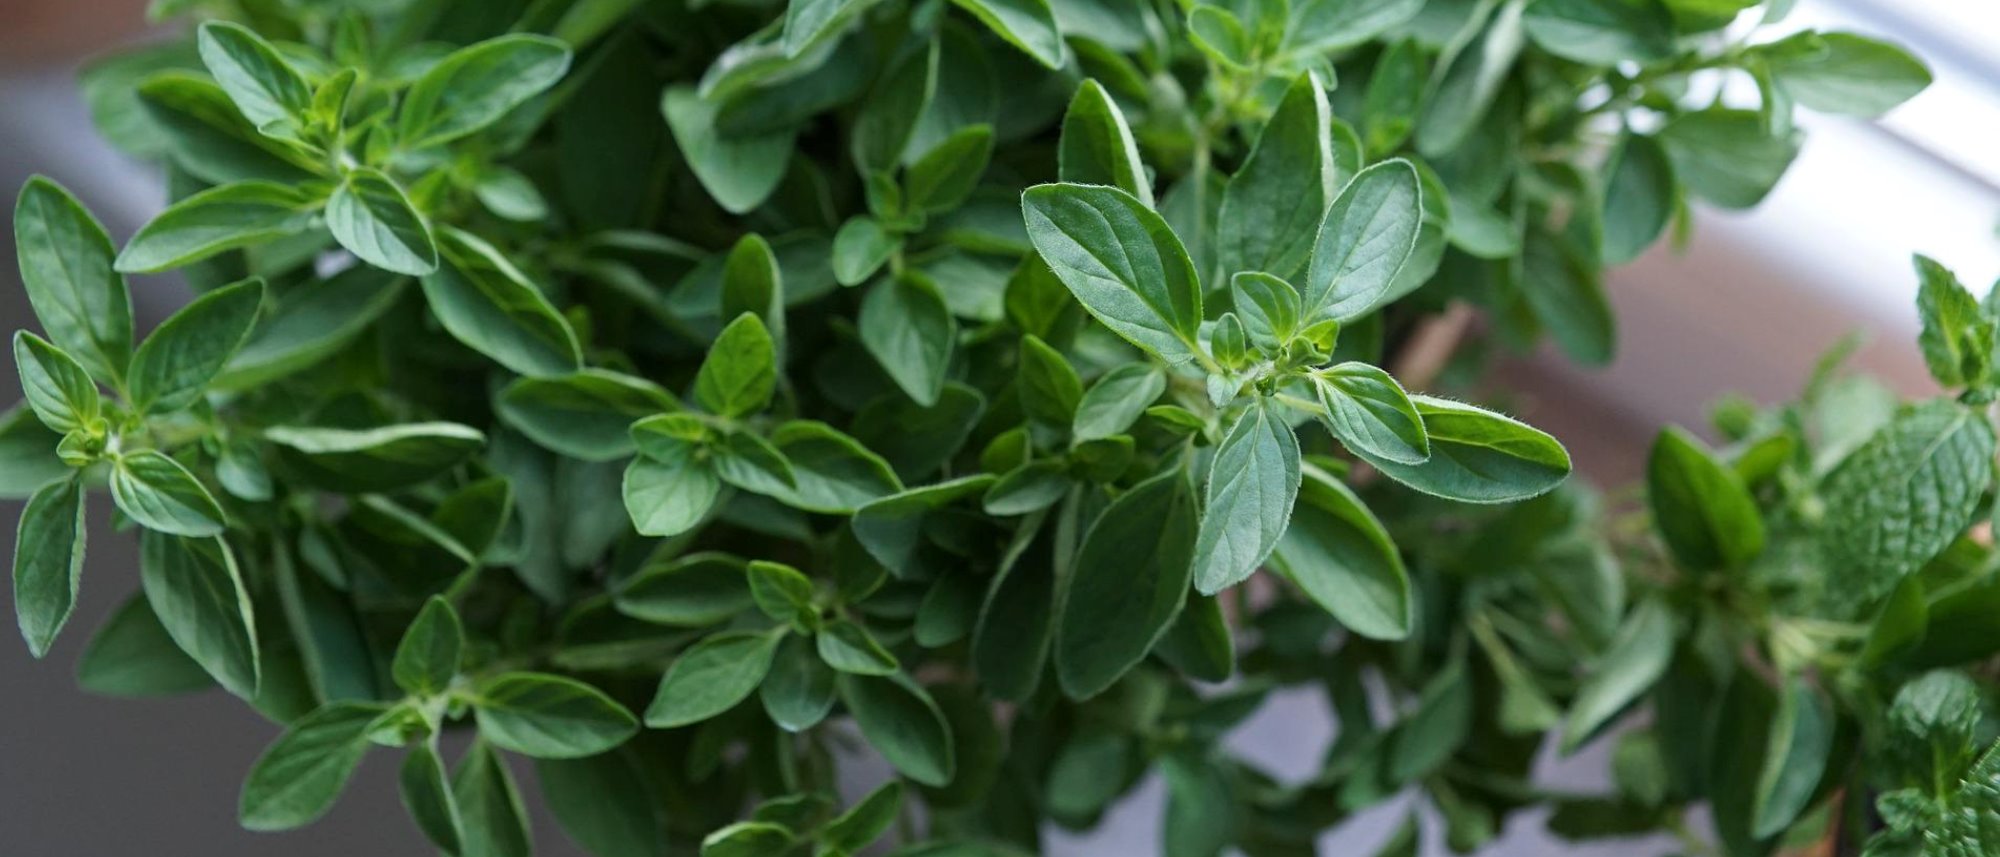 Grow fresh oregano for Italian cooking and more